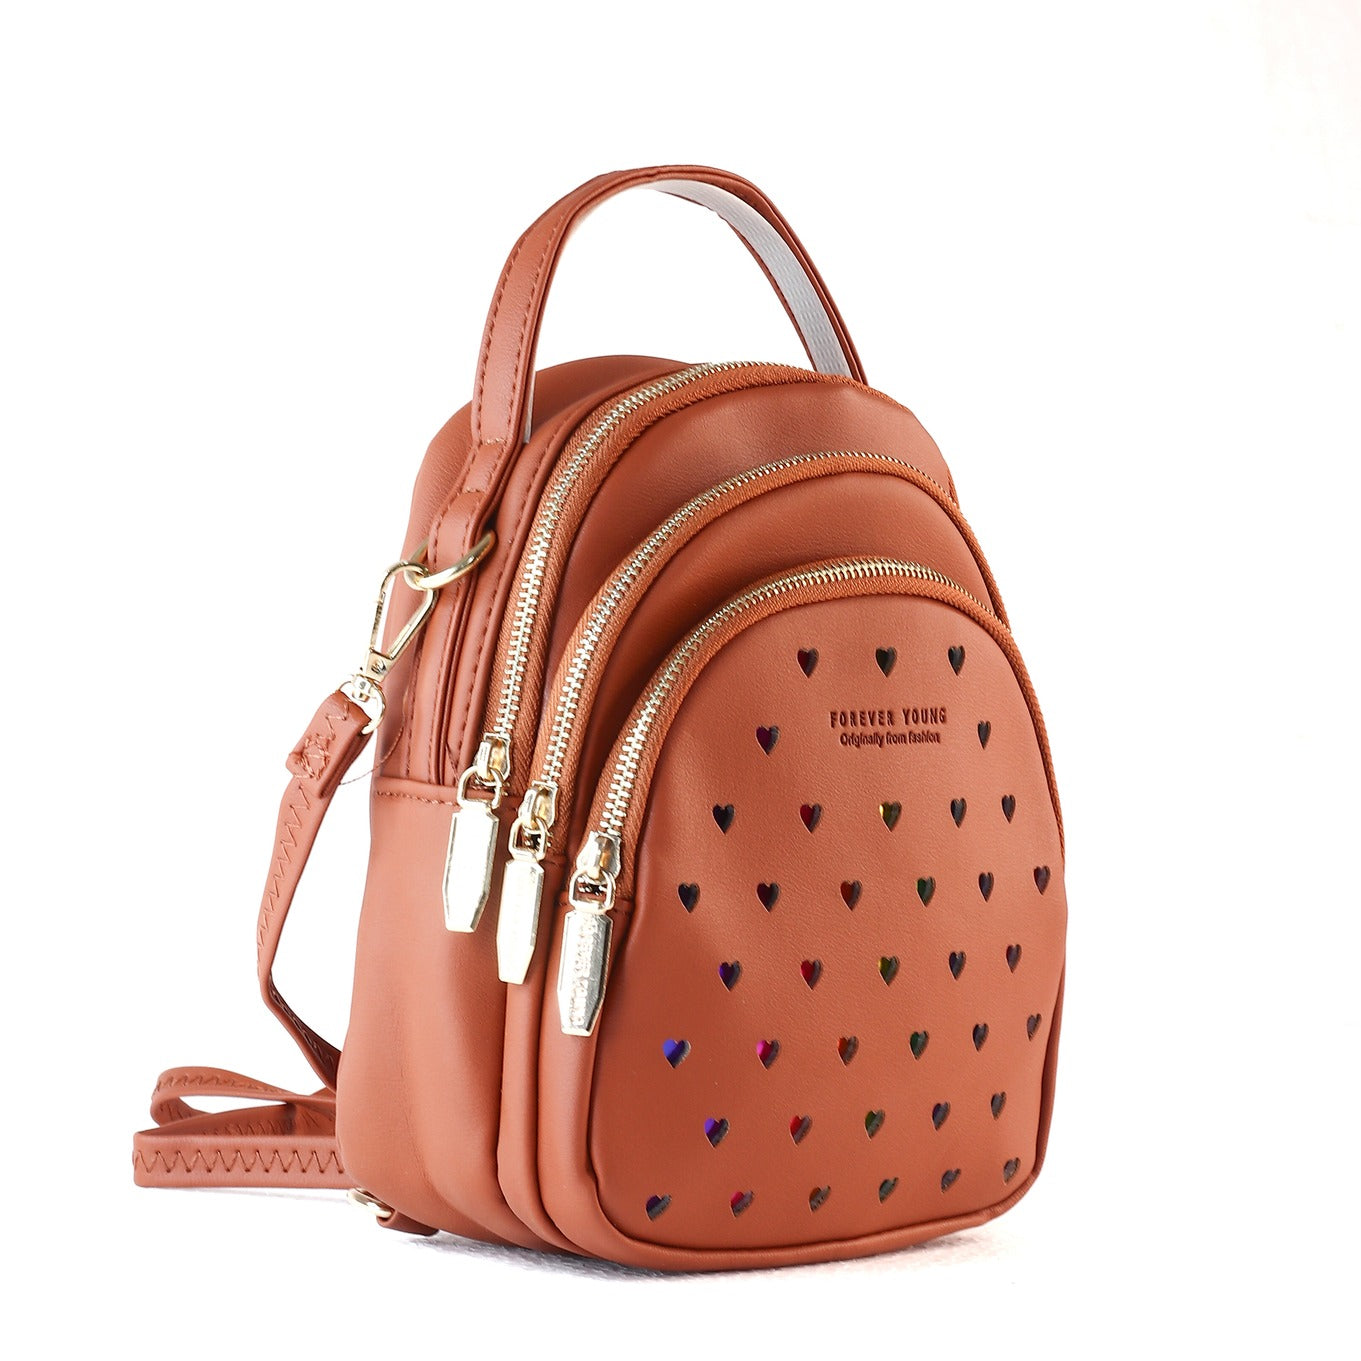 Forever Young 3 Zipper Love Mini Backpack For Women | Casual Travel Bag